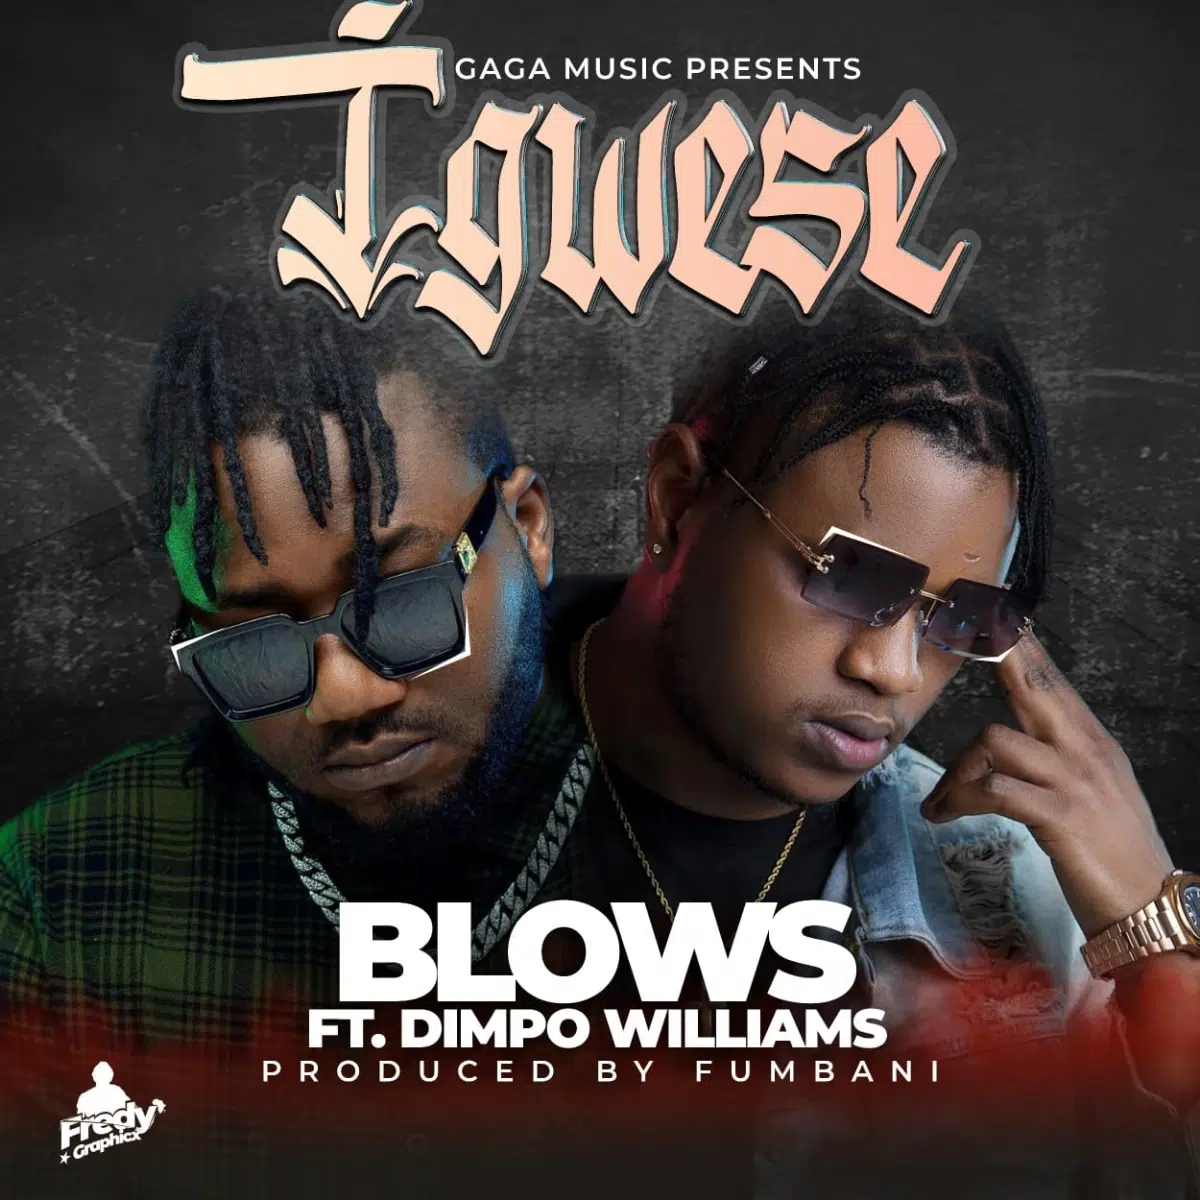 DOWNLOAD: Blows Feat Dimpo Williams – “Igwese” Mp3